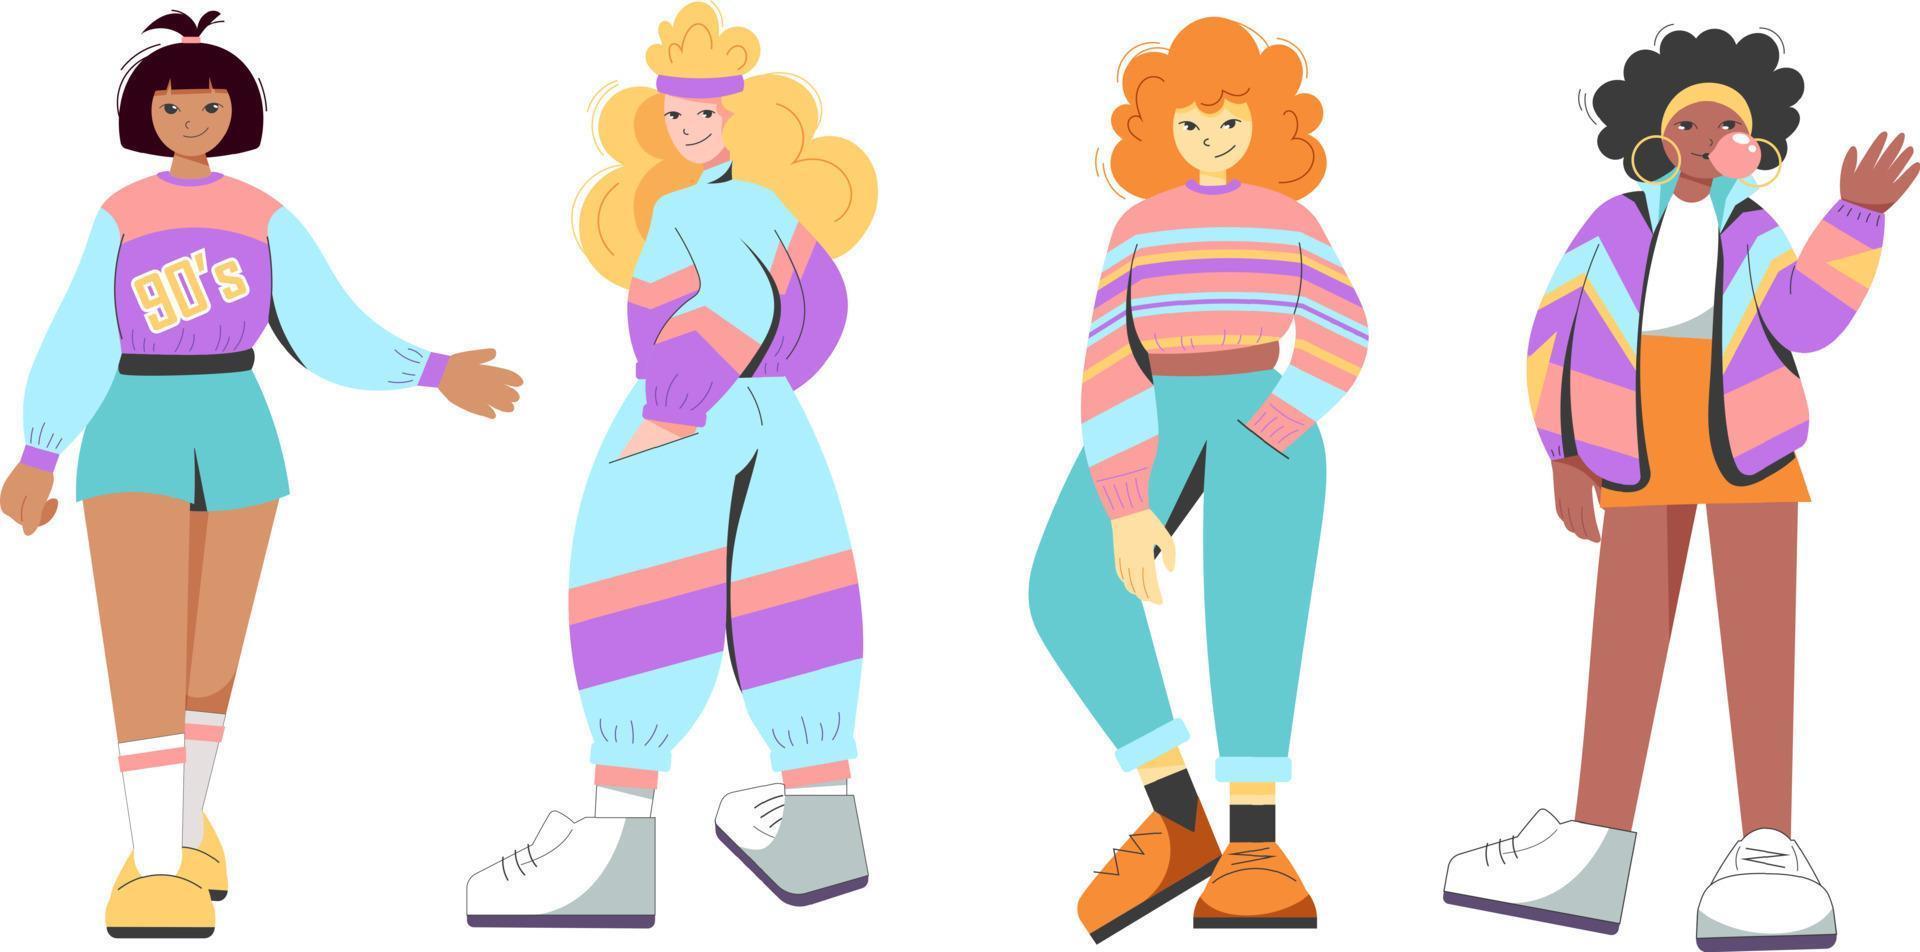 Flat retro design. Set of women in 90's sports style. Black woman, girl, blonde, redhead in 90's clothing vector